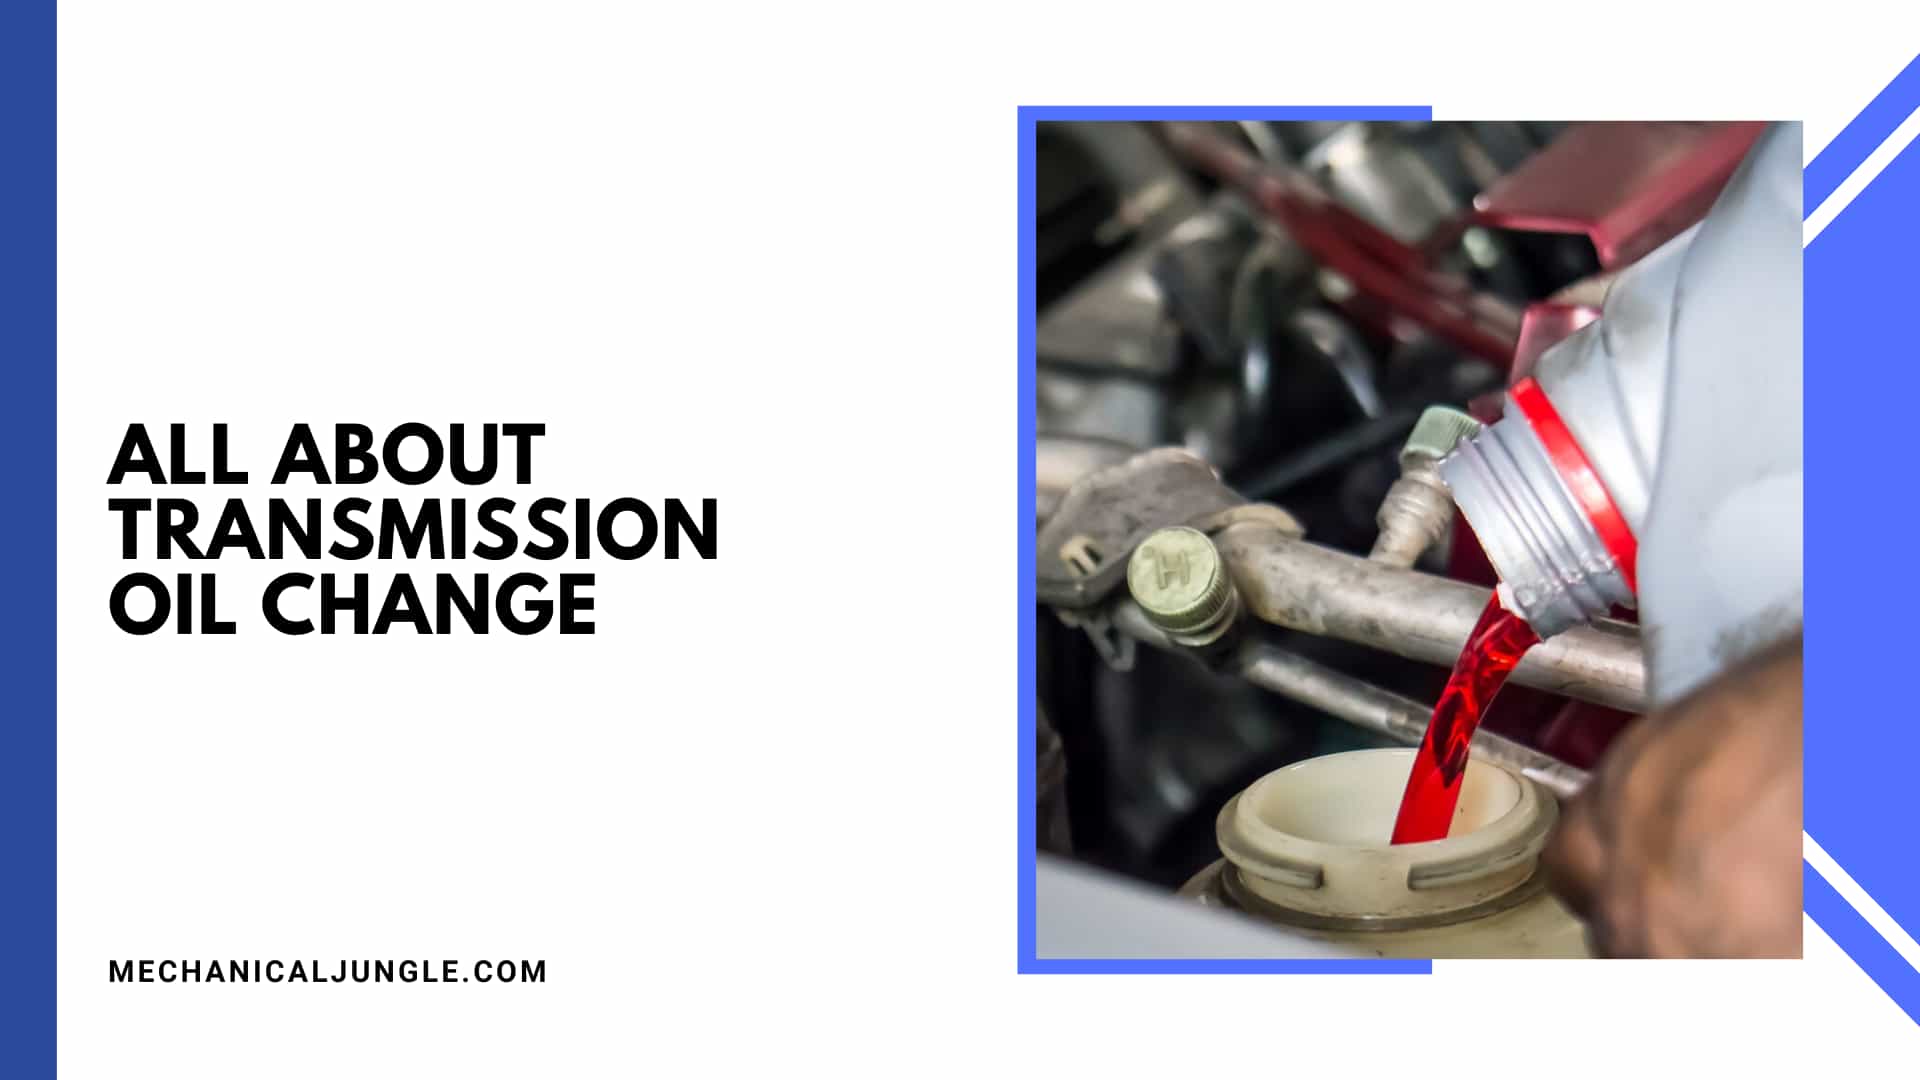 All About Transmission Oil Change